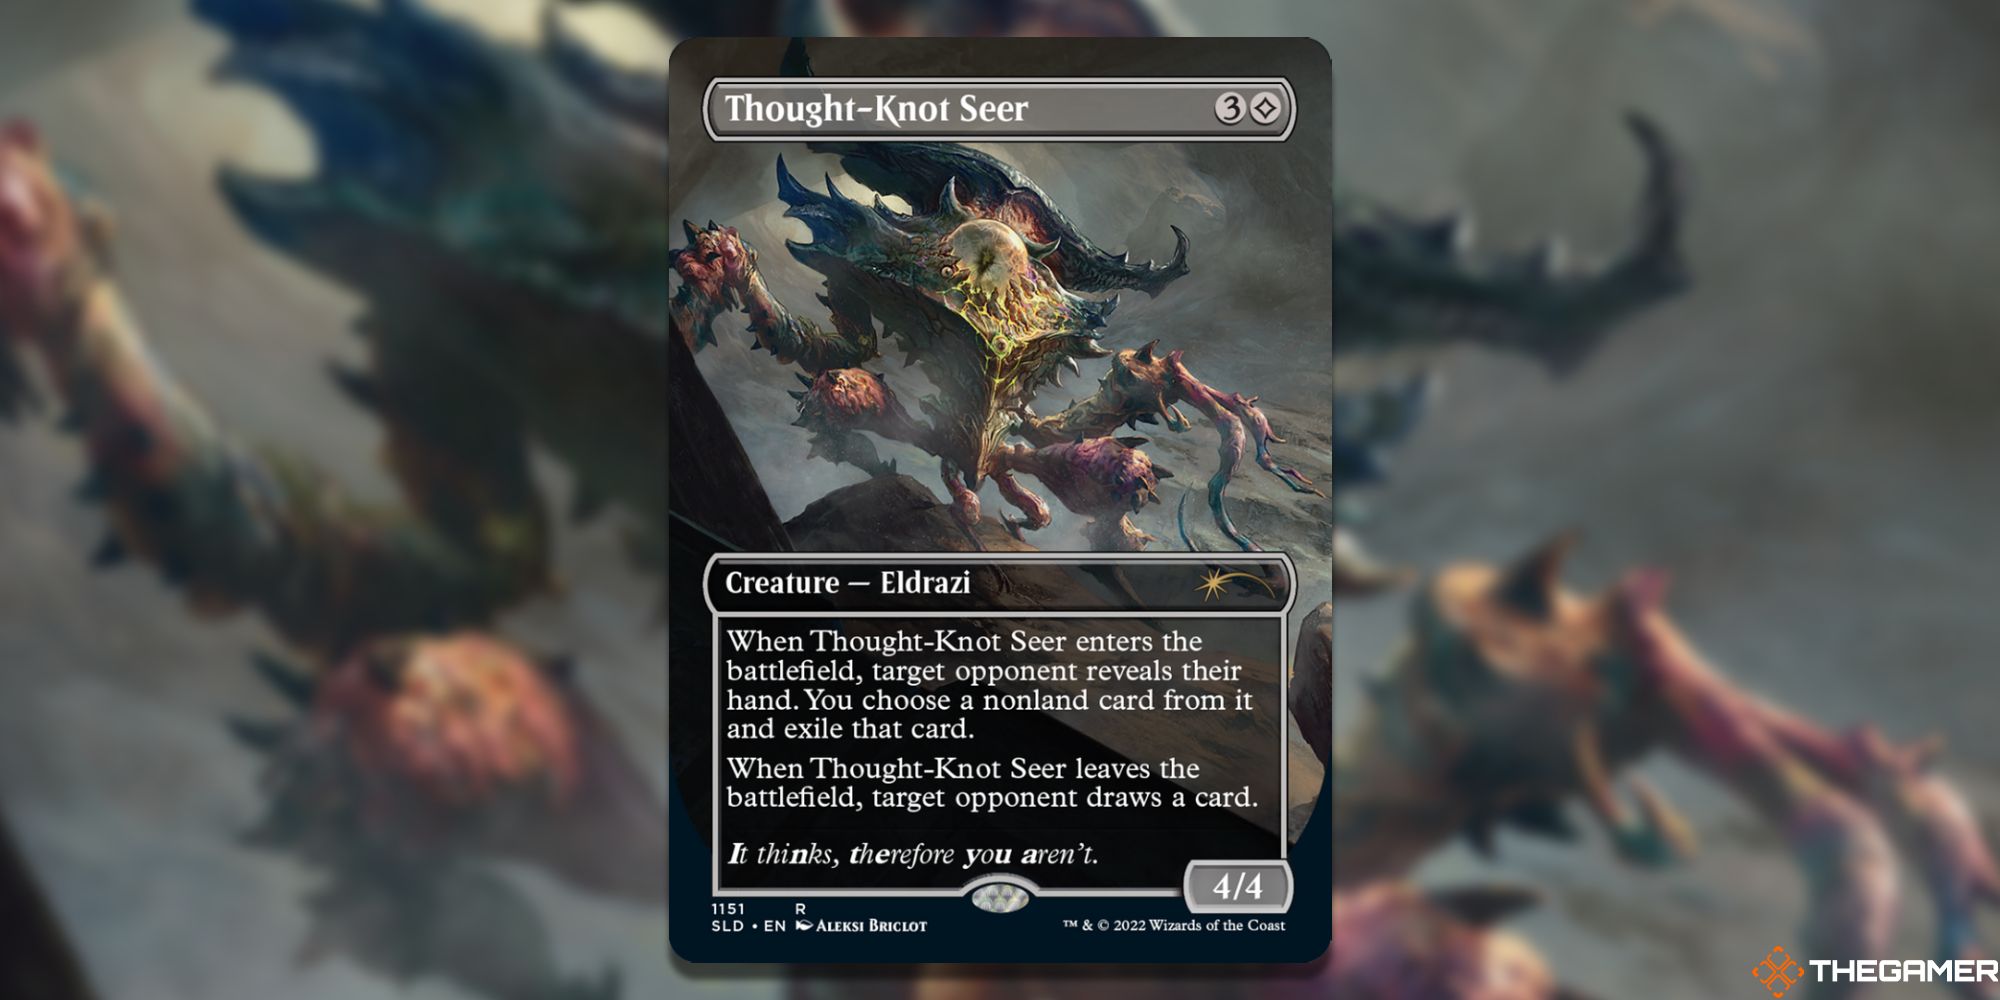 ThoughtKnot Seer